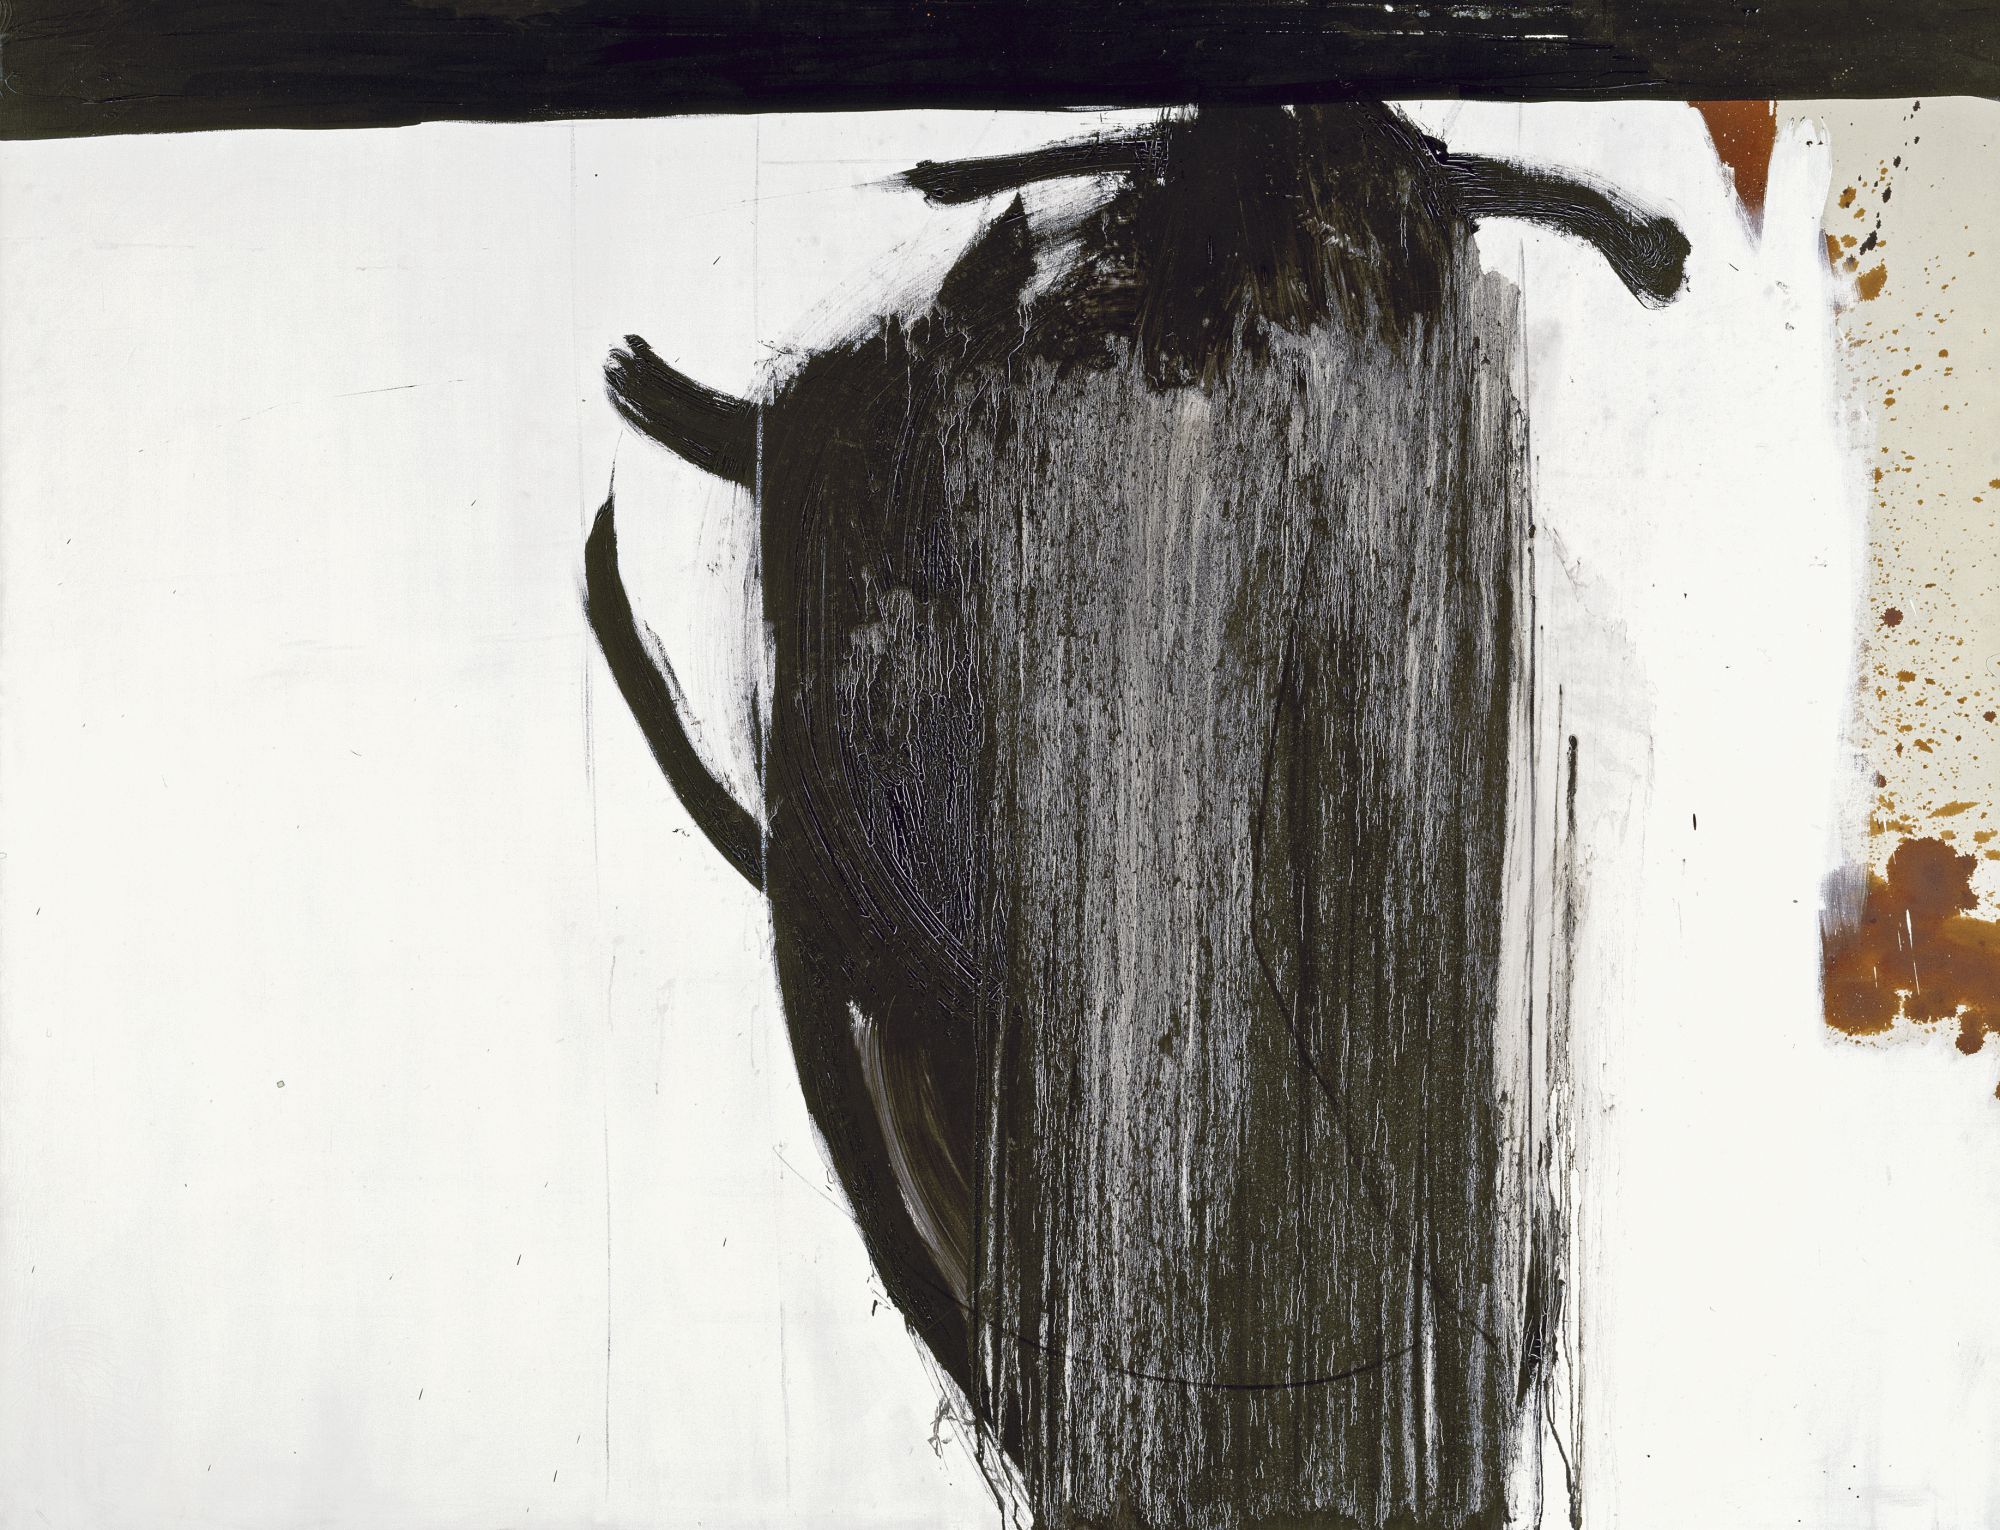 Totemic Figure, 1960, oil and charcoal on canvas, 84 ✕ 109 in. (213.4 ✕ 276.9 cm)